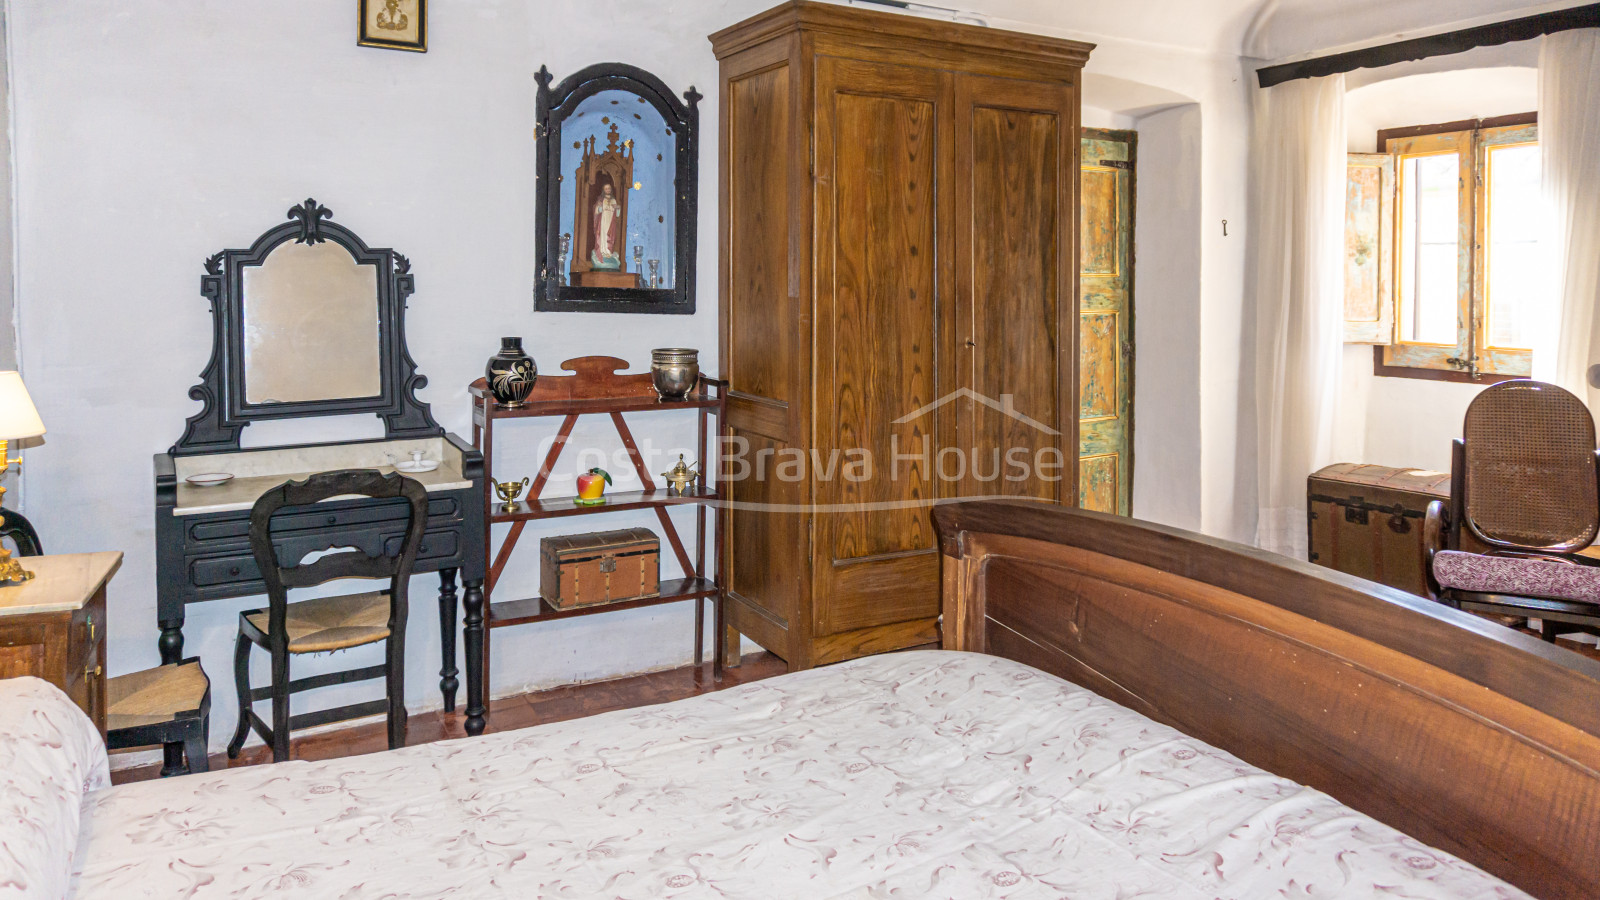 Renovated townhouse for sale in Begur, in a quietl location only 3 min on foot to the church square